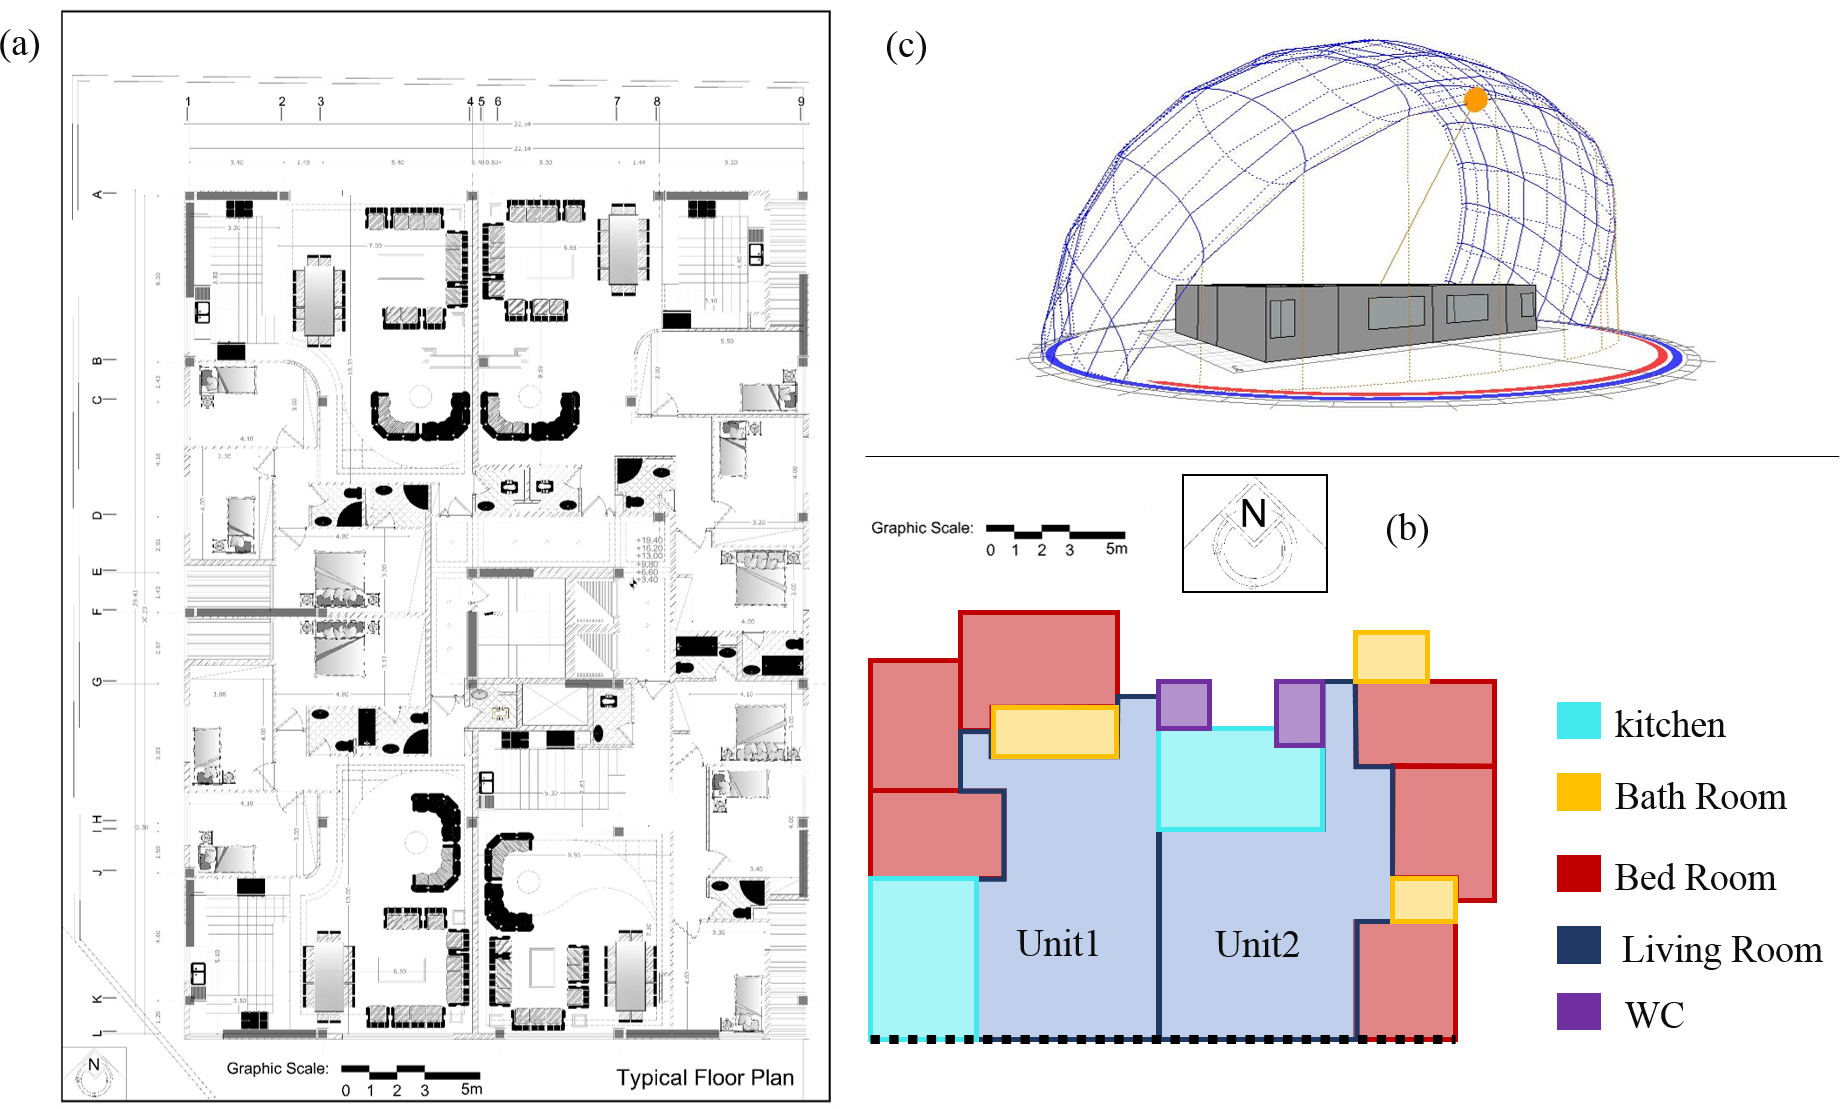 (a) Typical Floor plan of Residential Building. (b) Simplified typical floor plan of a flat with three bedrooms. Black bold dash line shows the southward-facing façades of this flat where shading panels will be added. (For interpretation of the references to colour in this figure legend, the reader is referred to the web version of this article). (c) Model: southeast isometric view.